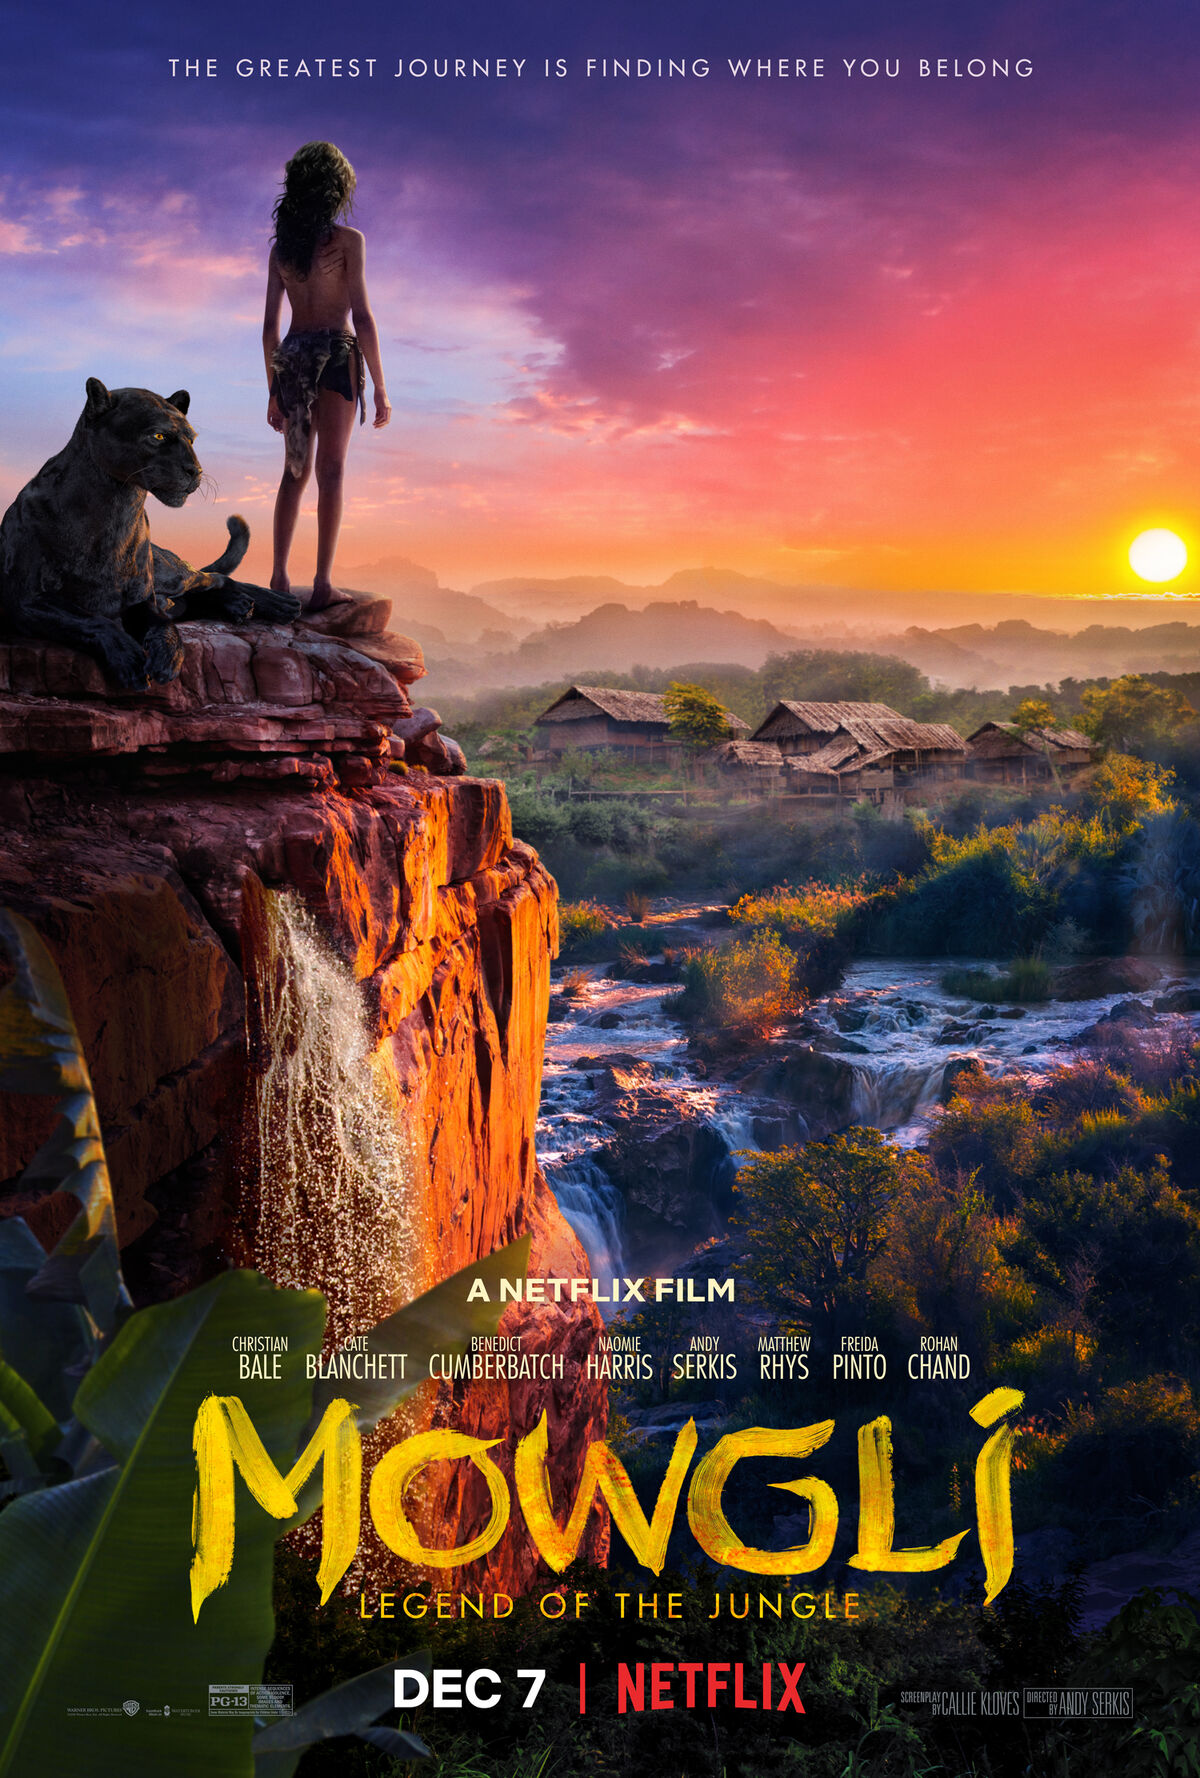 https://static.wikia.nocookie.net/warner-bros-entertainment/images/9/97/Mowgli-legend-of-the-jungle-poster.jpg/revision/latest/scale-to-width-down/1200?cb=20181108145654